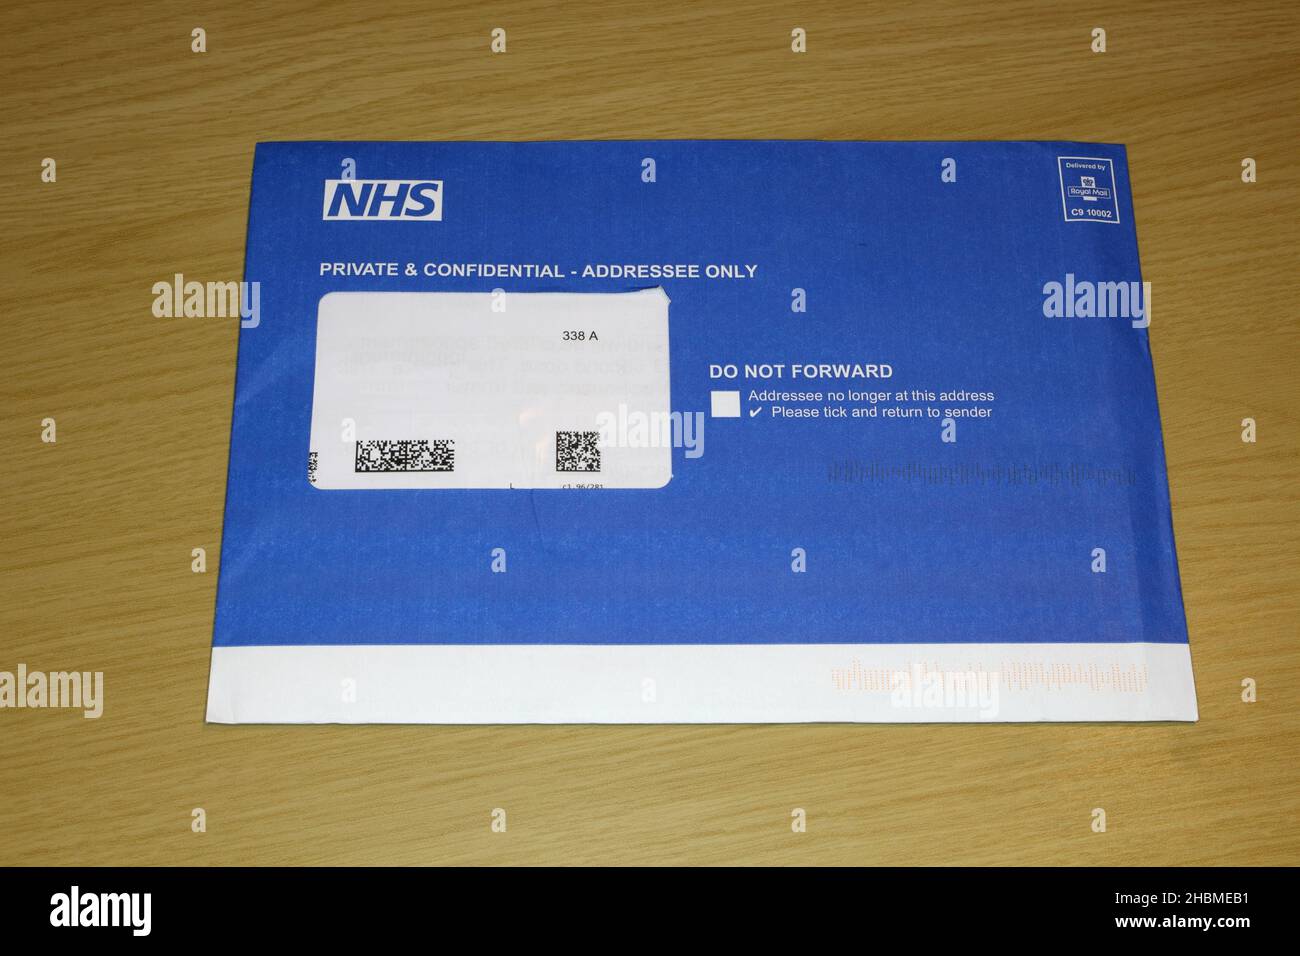 NHS Covid booster letter Stock Photo